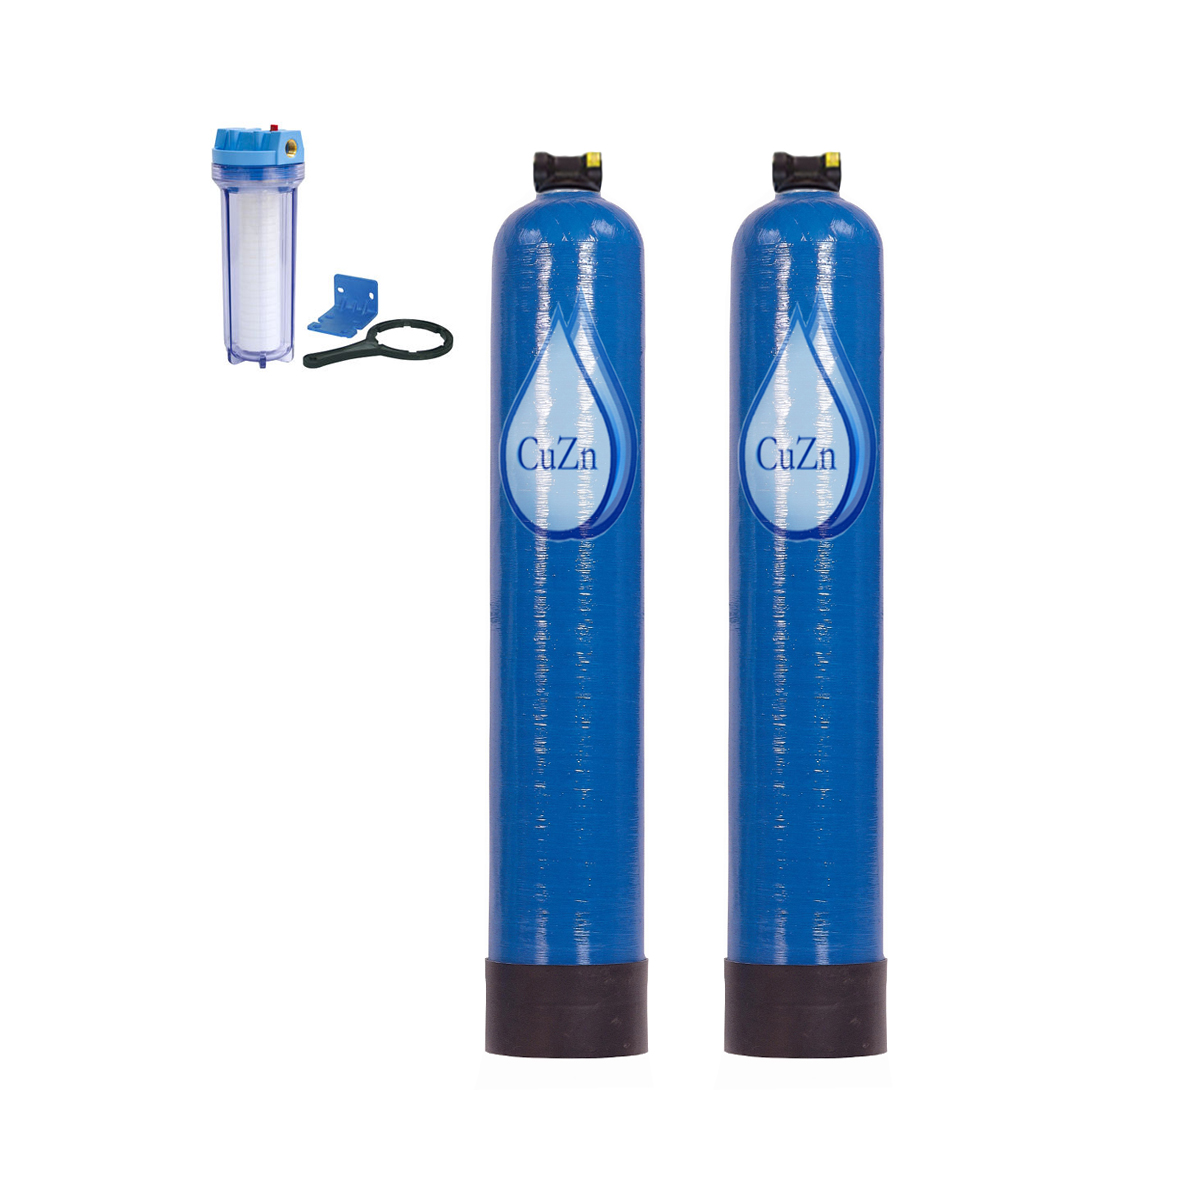 MEDIUM SIZE Whole House Water Filter Advanced Upgrade